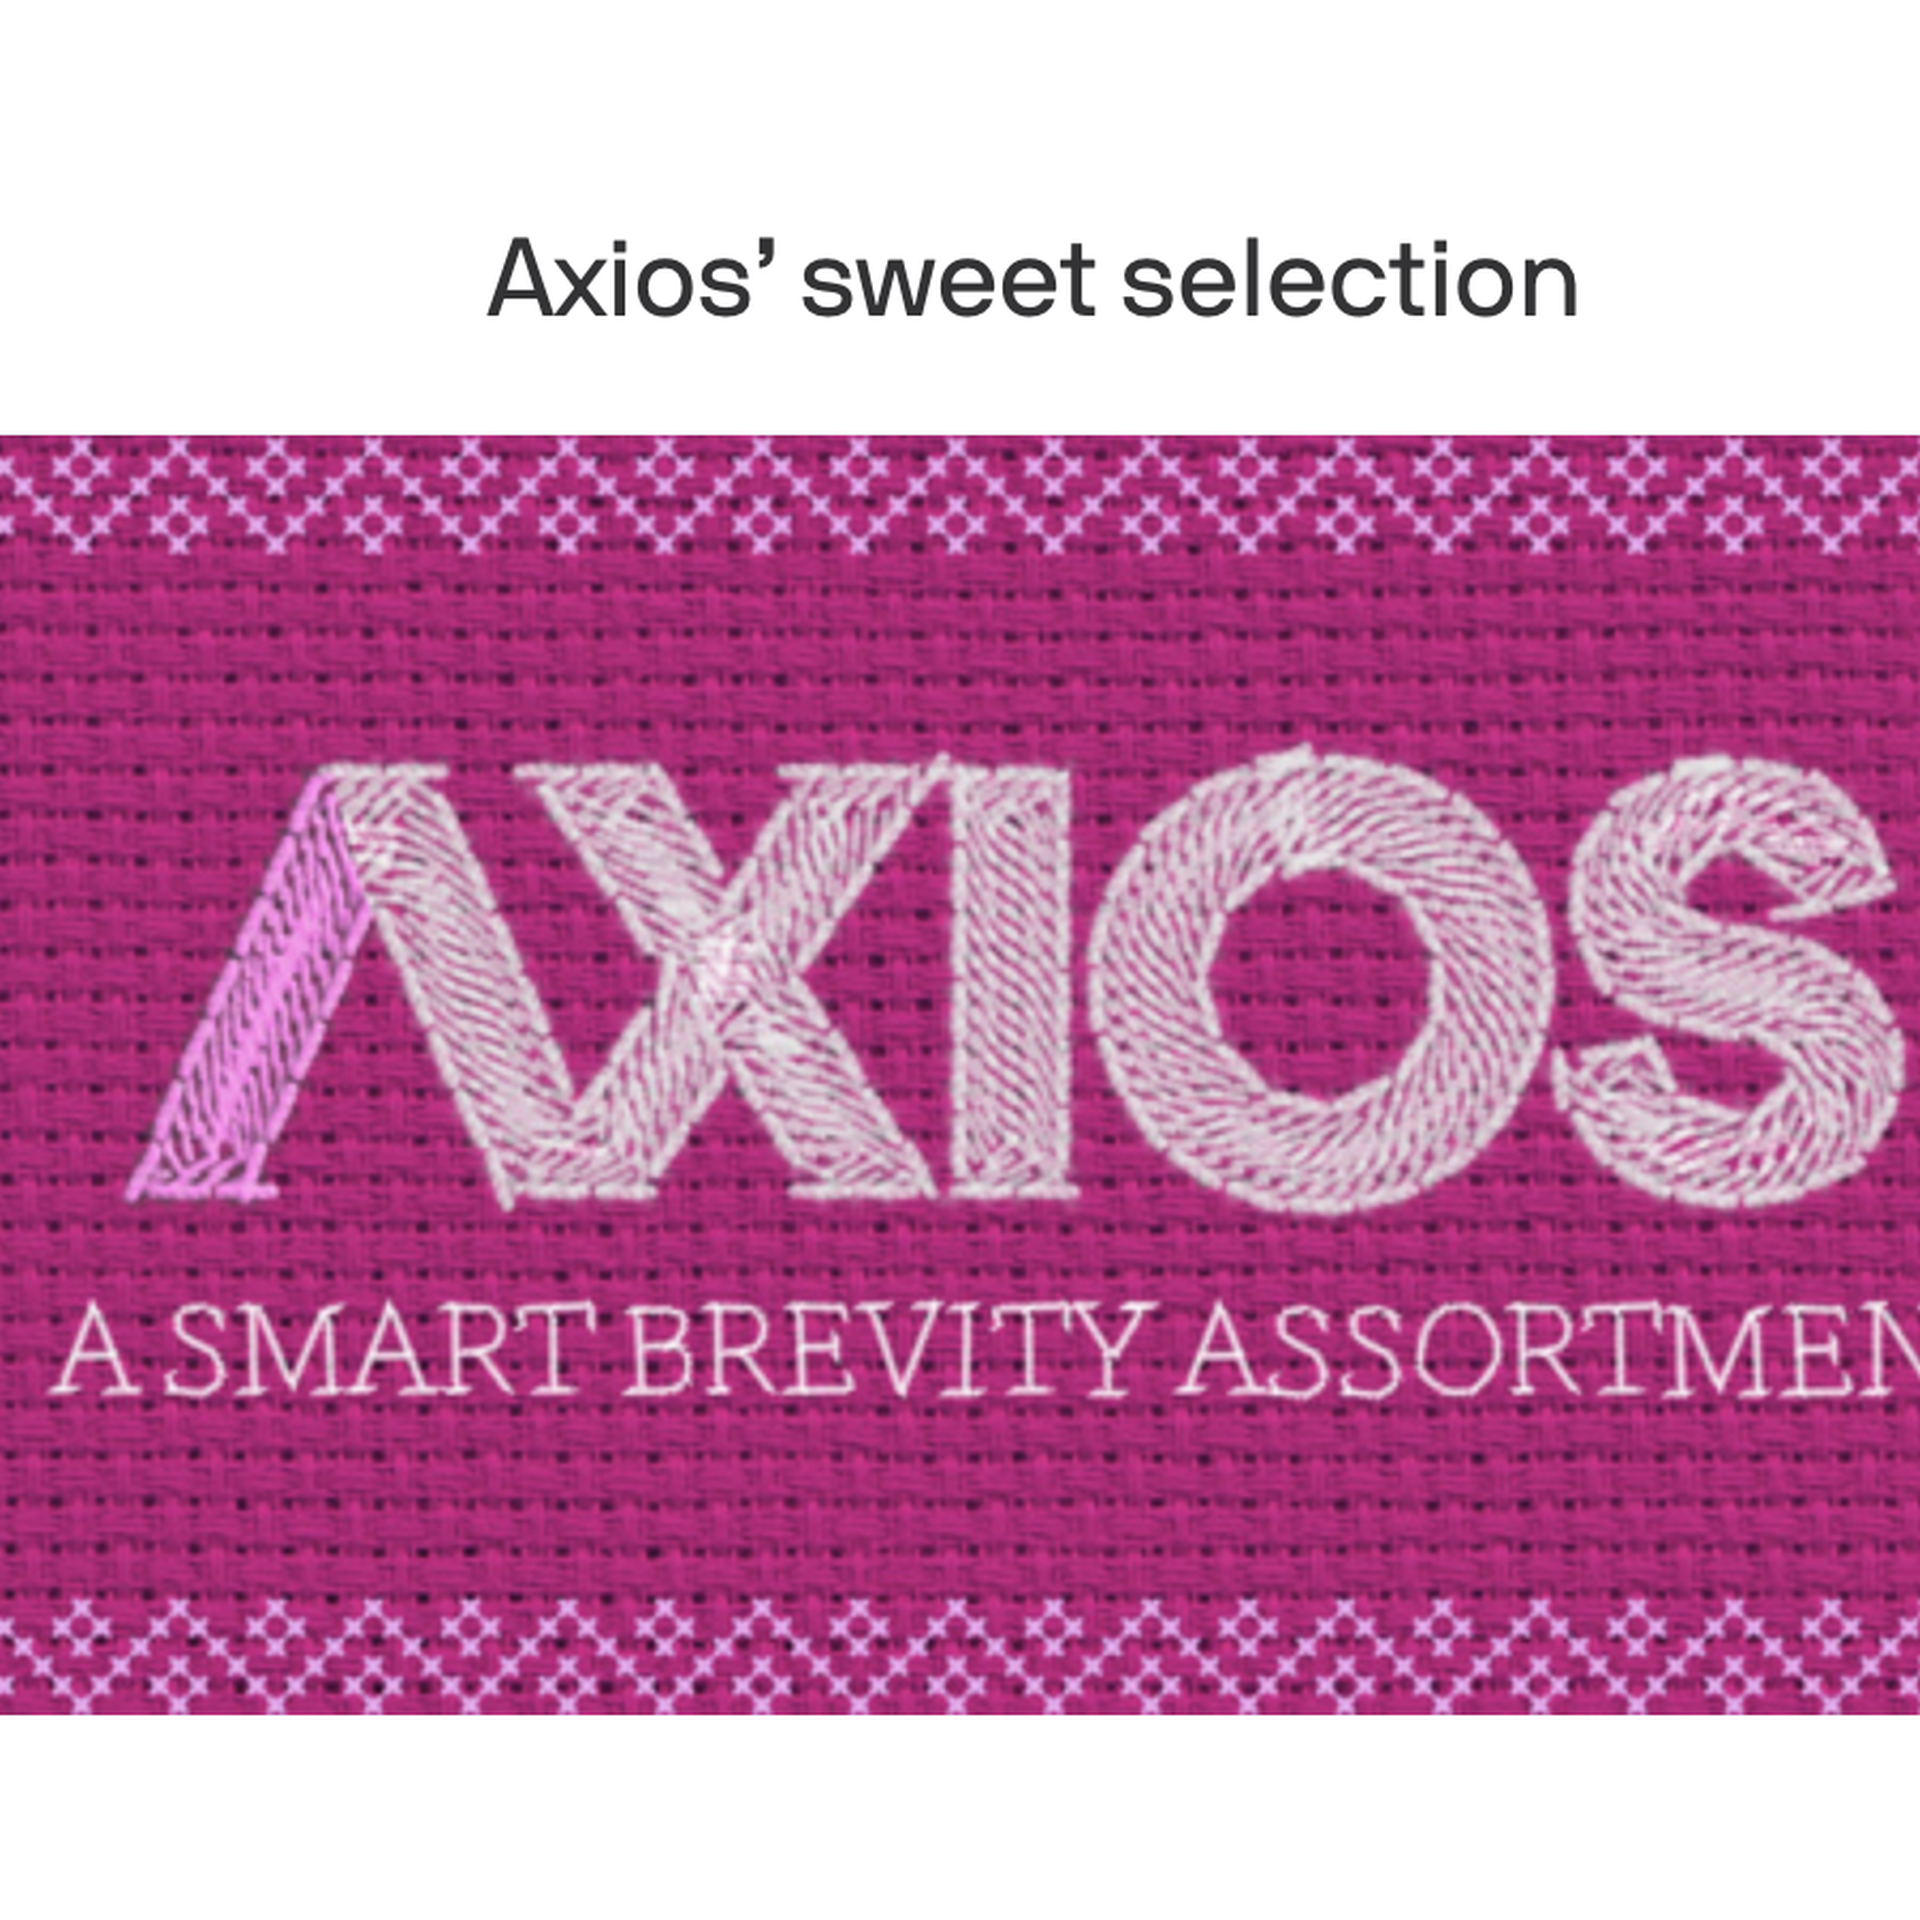 A hot pink, cross stitched box with the words "Axios: A Smart Brevity Assortment" on it.